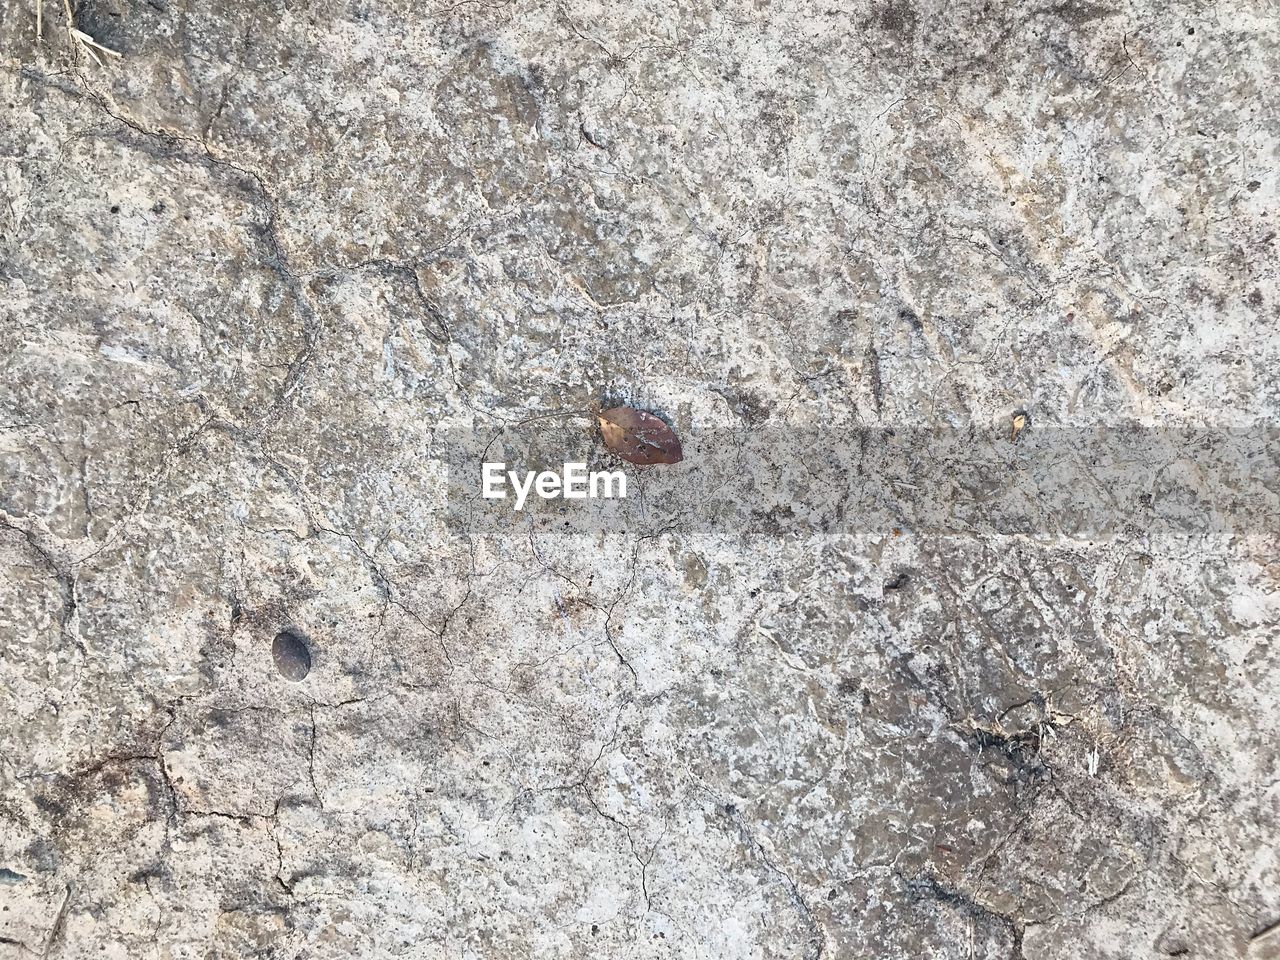 HIGH ANGLE VIEW OF INSECT ON ROCK